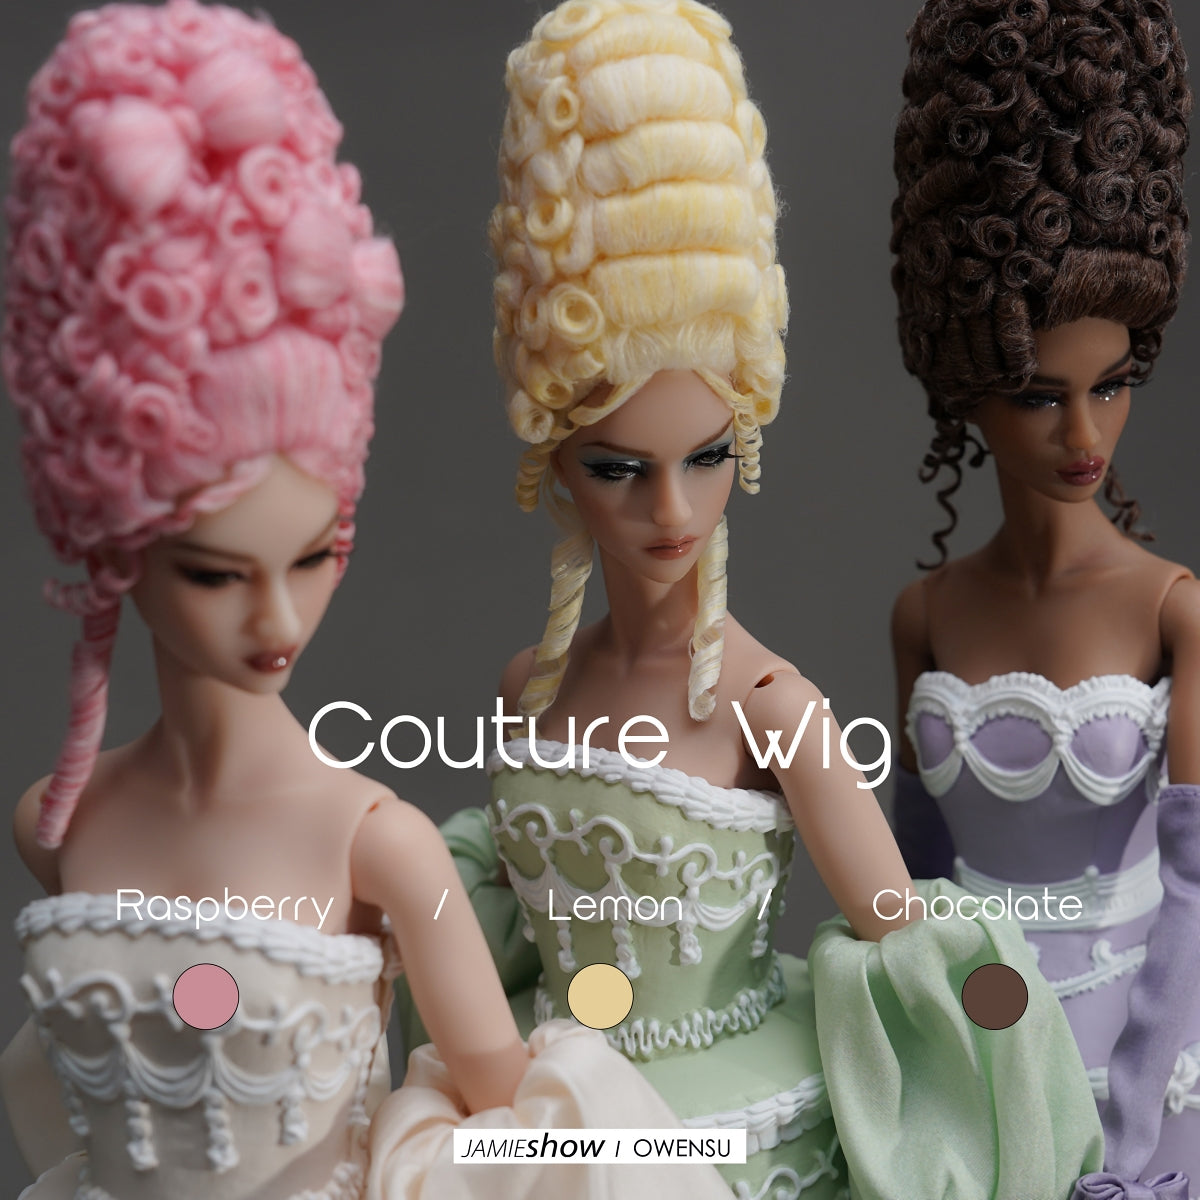 Versailles II "Let Them Eat Cake" Couture Wig Rasberry